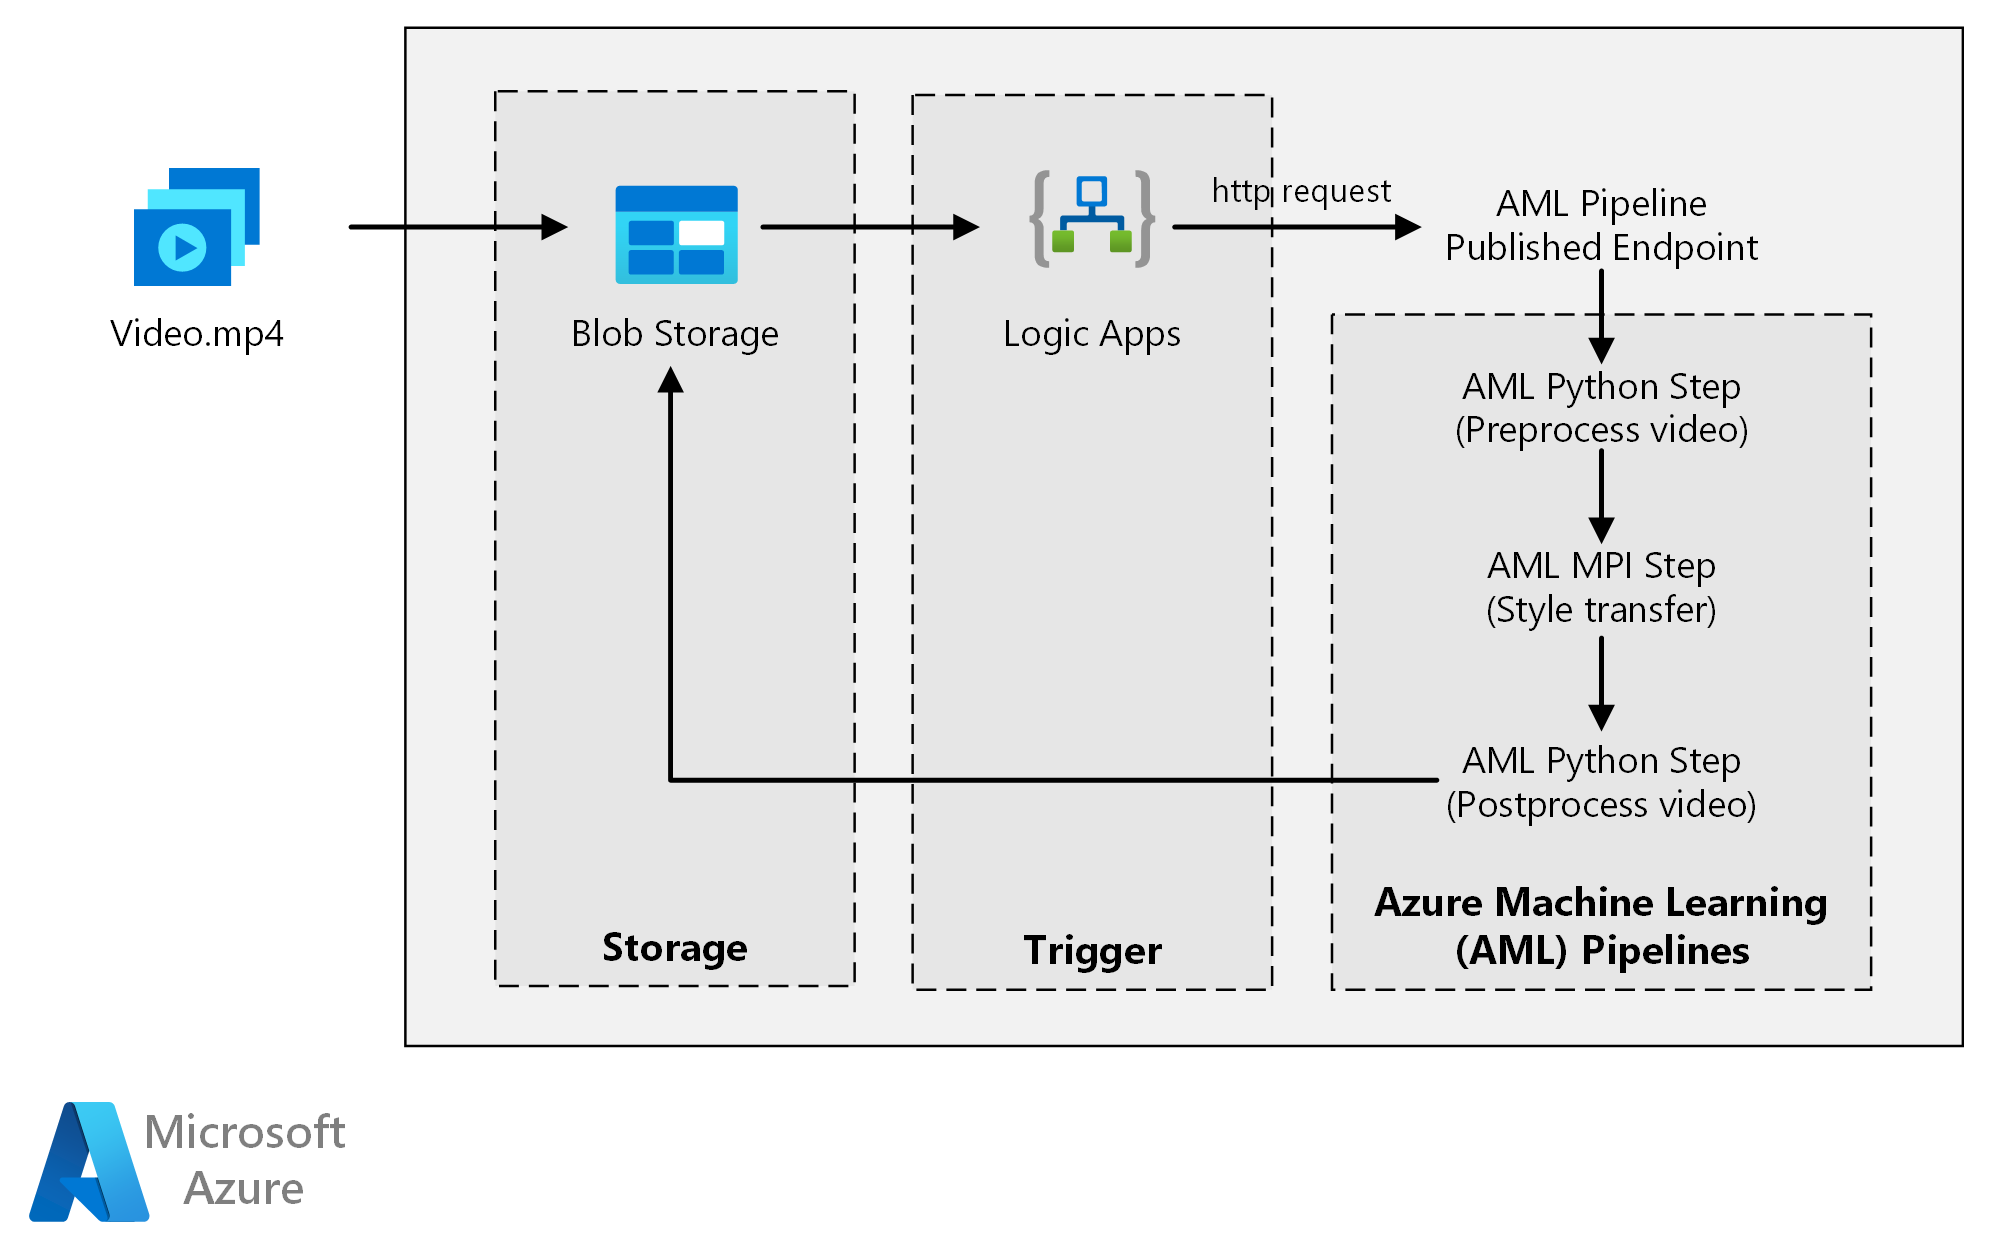 Architecture diagram for deep learning models using Azure Machine Learning.